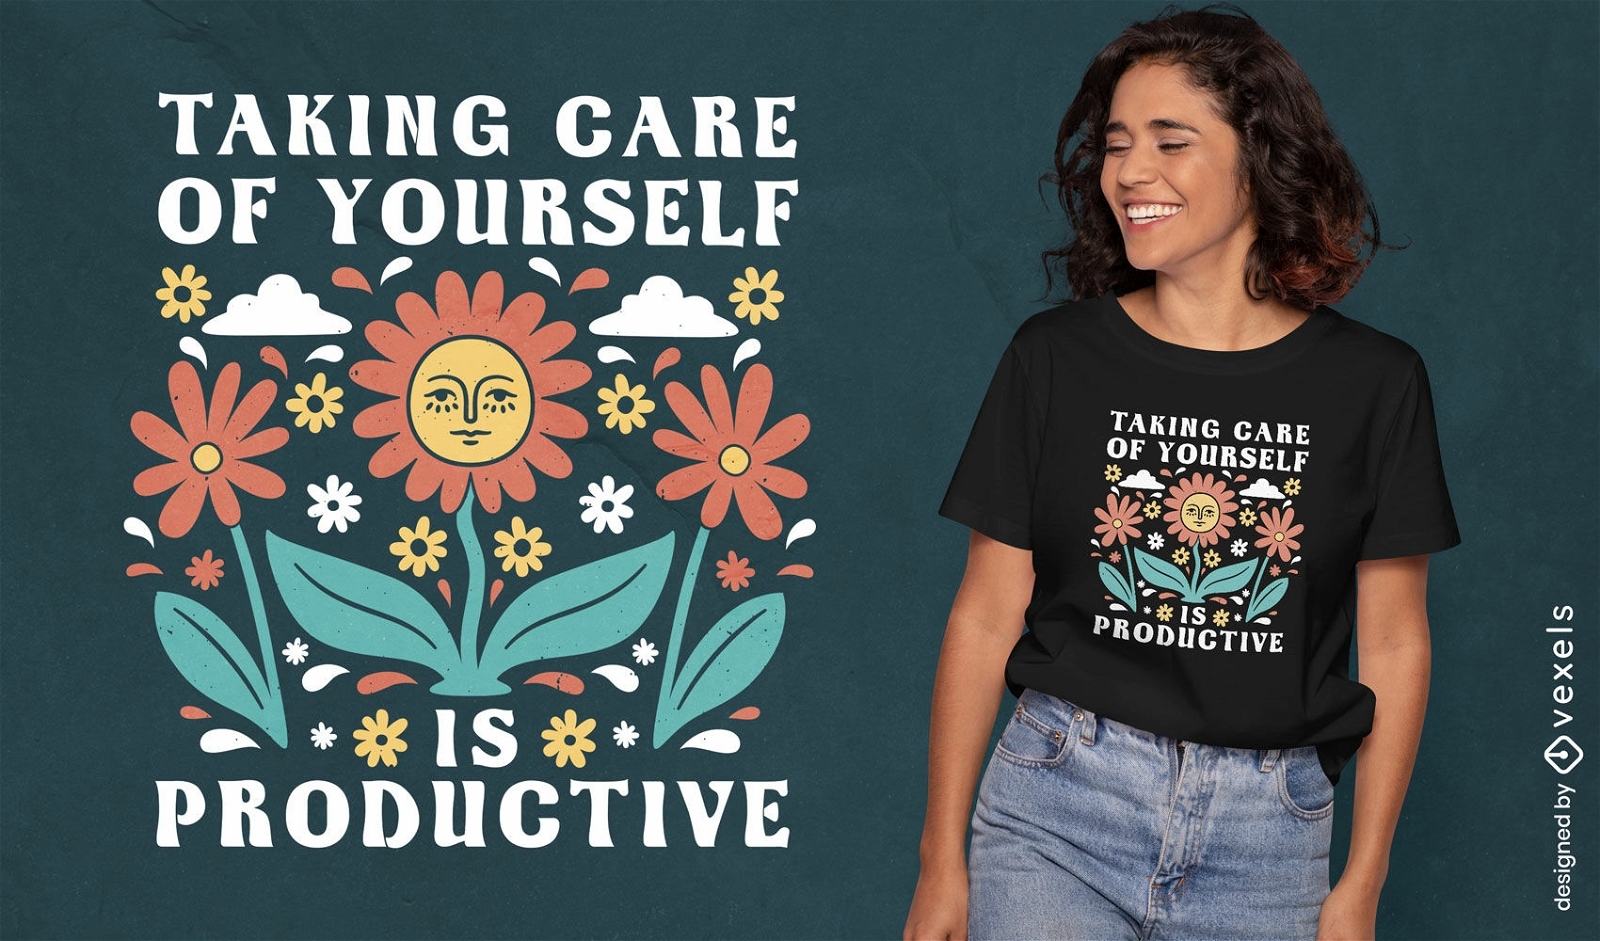 Taking care of yourself message t-shirt design